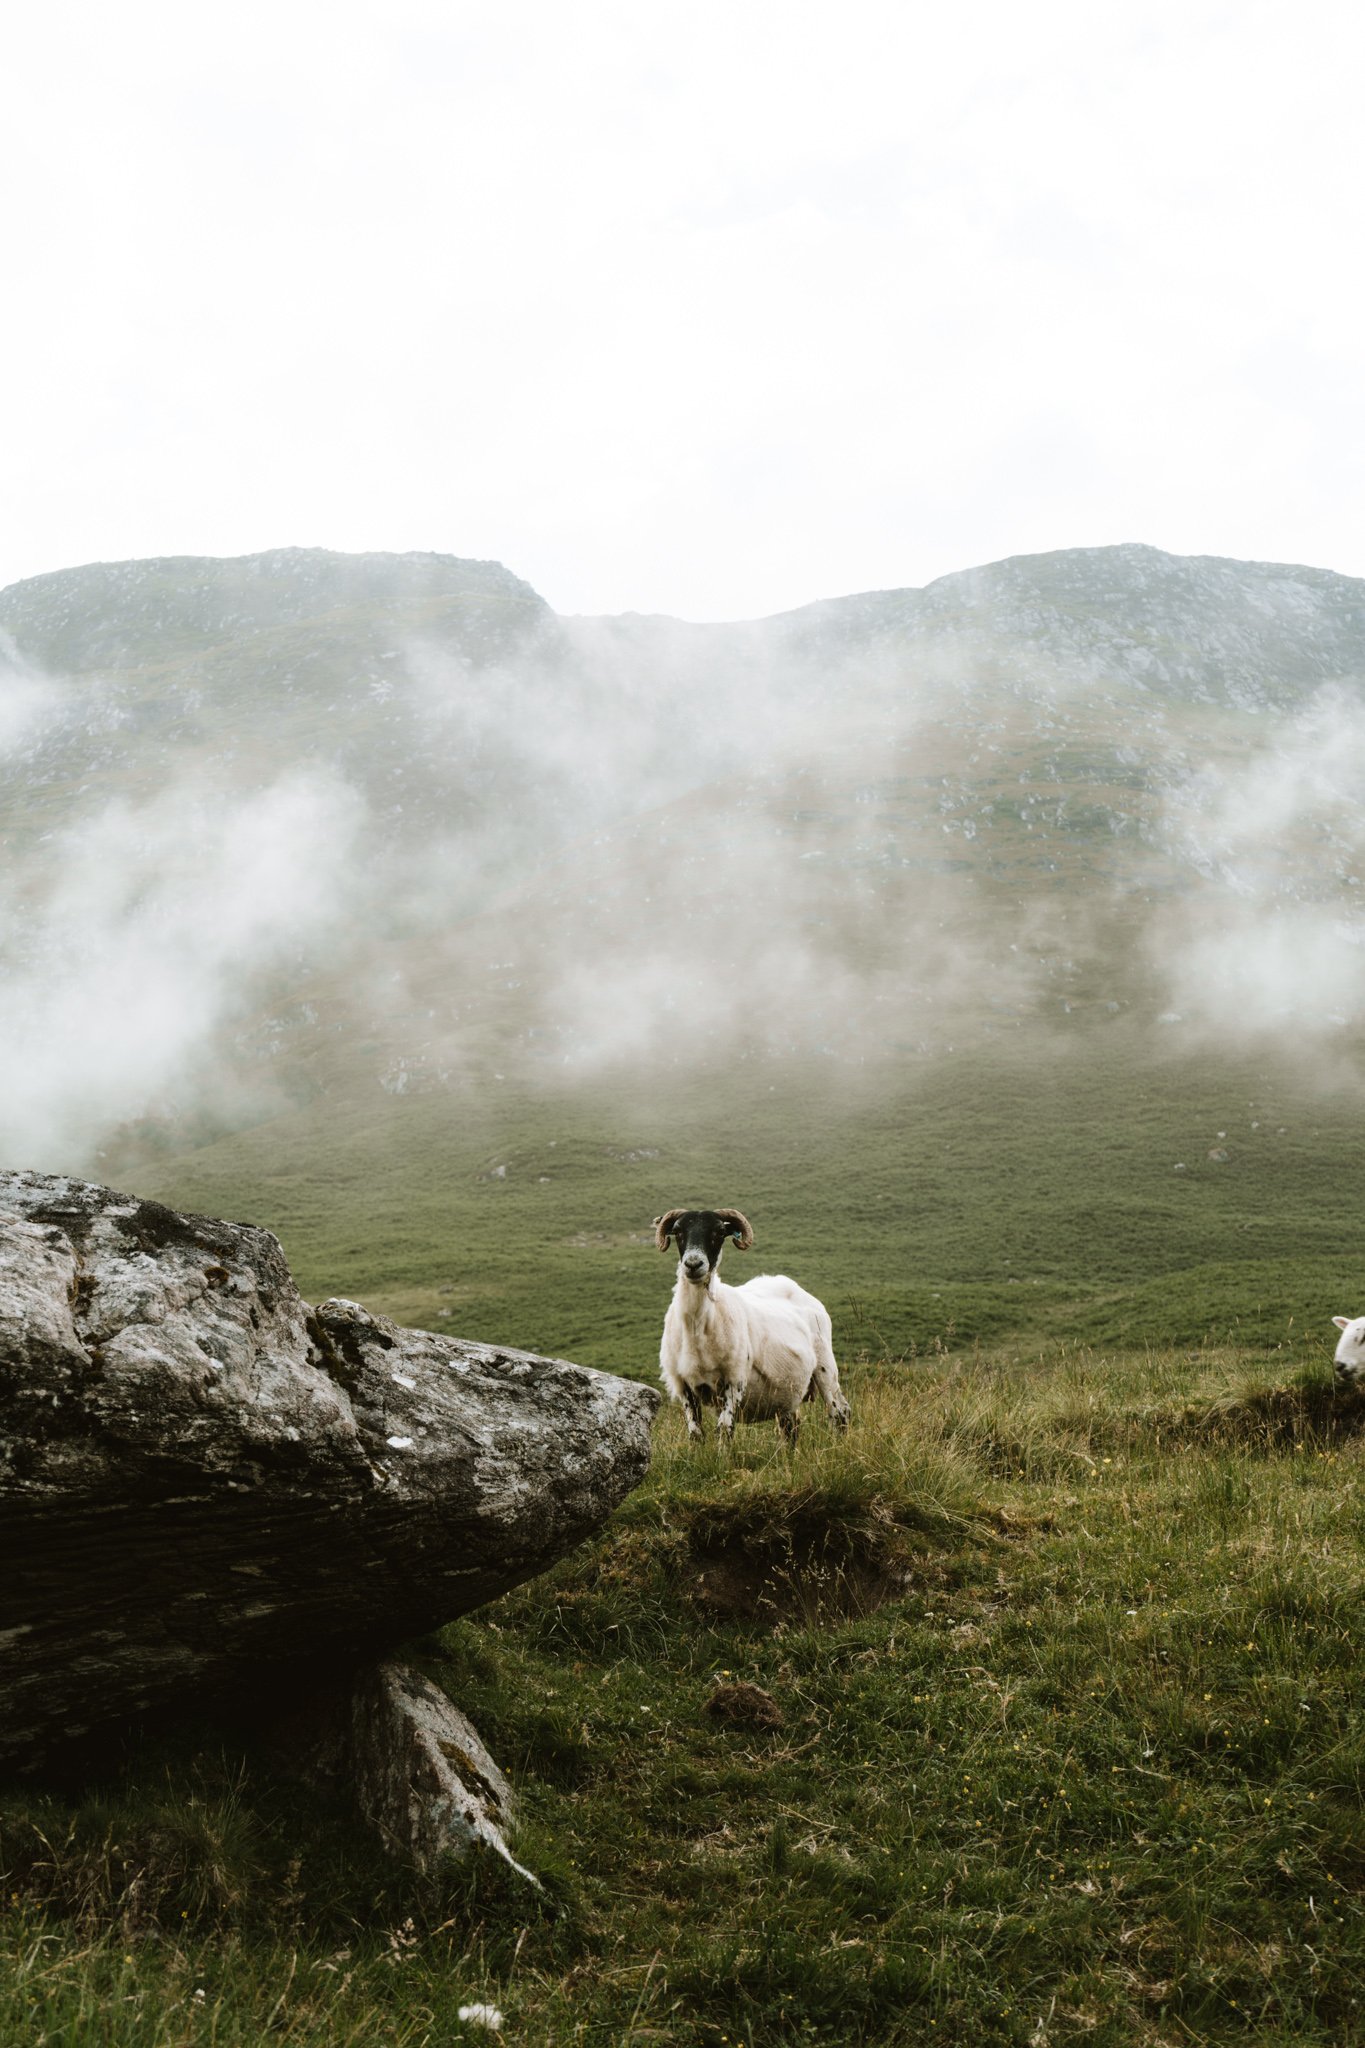 A sheep on the hills of Ben Nevis